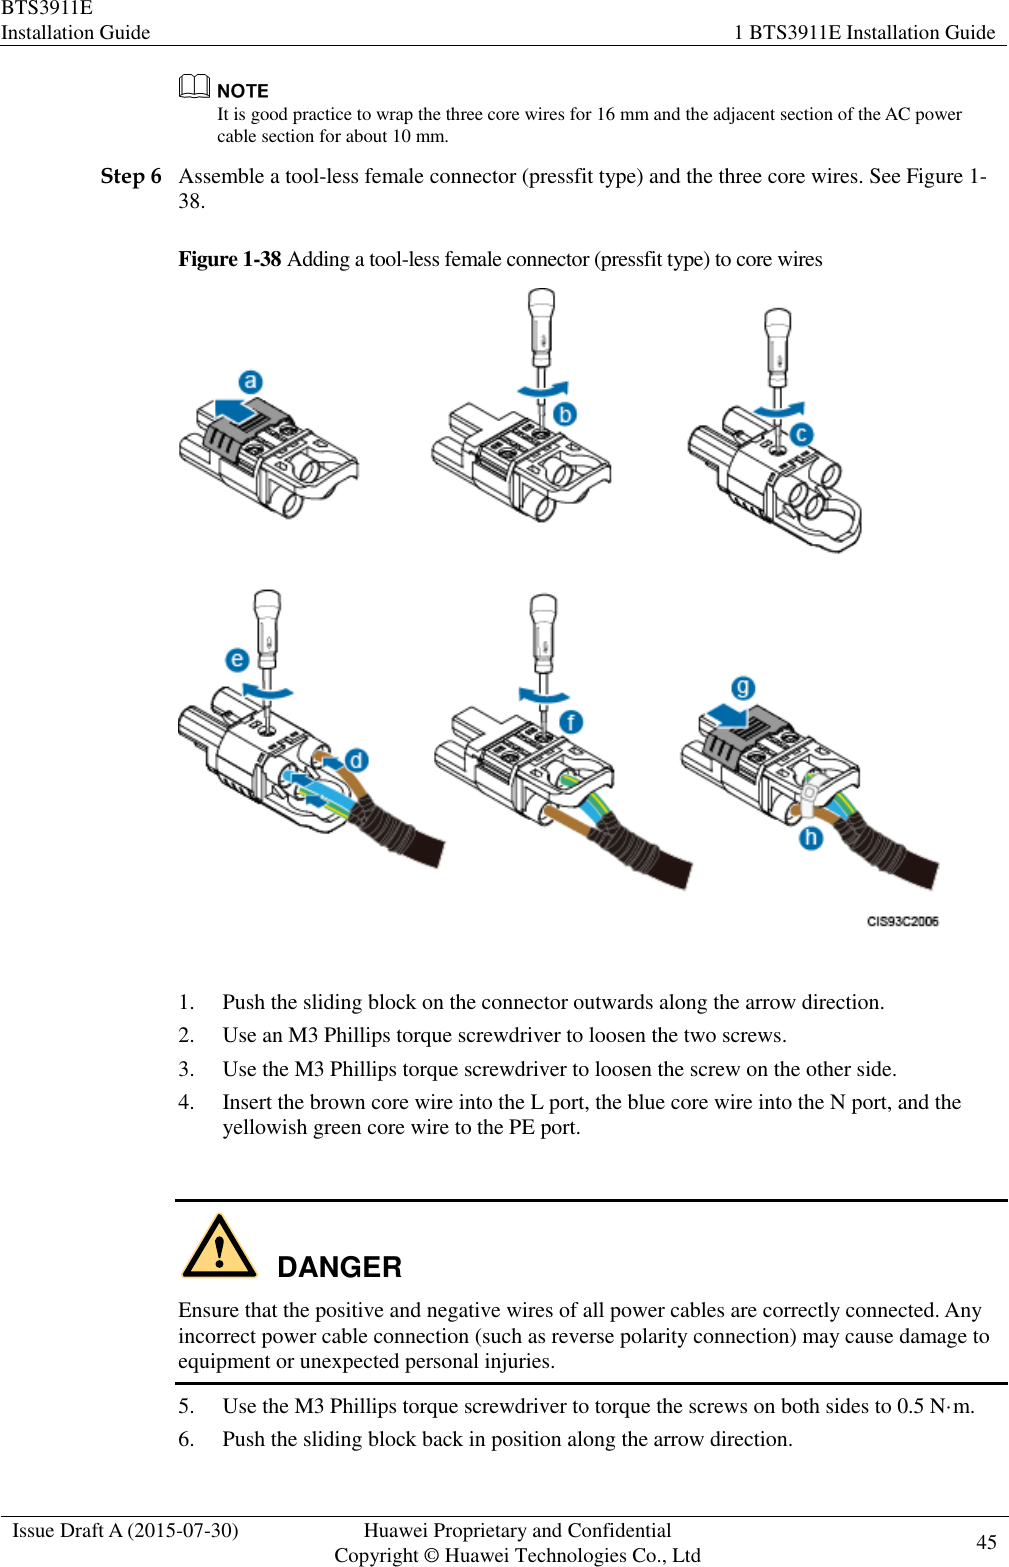 BTS3911E Installation Guide 1 BTS3911E Installation Guide  Issue Draft A (2015-07-30) Huawei Proprietary and Confidential           Copyright © Huawei Technologies Co., Ltd 45     It is good practice to wrap the three core wires for 16 mm and the adjacent section of the AC power cable section for about 10 mm. Step 6 Assemble a tool-less female connector (pressfit type) and the three core wires. See Figure 1-38. Figure 1-38 Adding a tool-less female connector (pressfit type) to core wires   1. Push the sliding block on the connector outwards along the arrow direction.   2. Use an M3 Phillips torque screwdriver to loosen the two screws.   3. Use the M3 Phillips torque screwdriver to loosen the screw on the other side.   4. Insert the brown core wire into the L port, the blue core wire into the N port, and the yellowish green core wire to the PE port.    DANGER Ensure that the positive and negative wires of all power cables are correctly connected. Any incorrect power cable connection (such as reverse polarity connection) may cause damage to equipment or unexpected personal injuries. 5. Use the M3 Phillips torque screwdriver to torque the screws on both sides to 0.5 N·m. 6. Push the sliding block back in position along the arrow direction. 